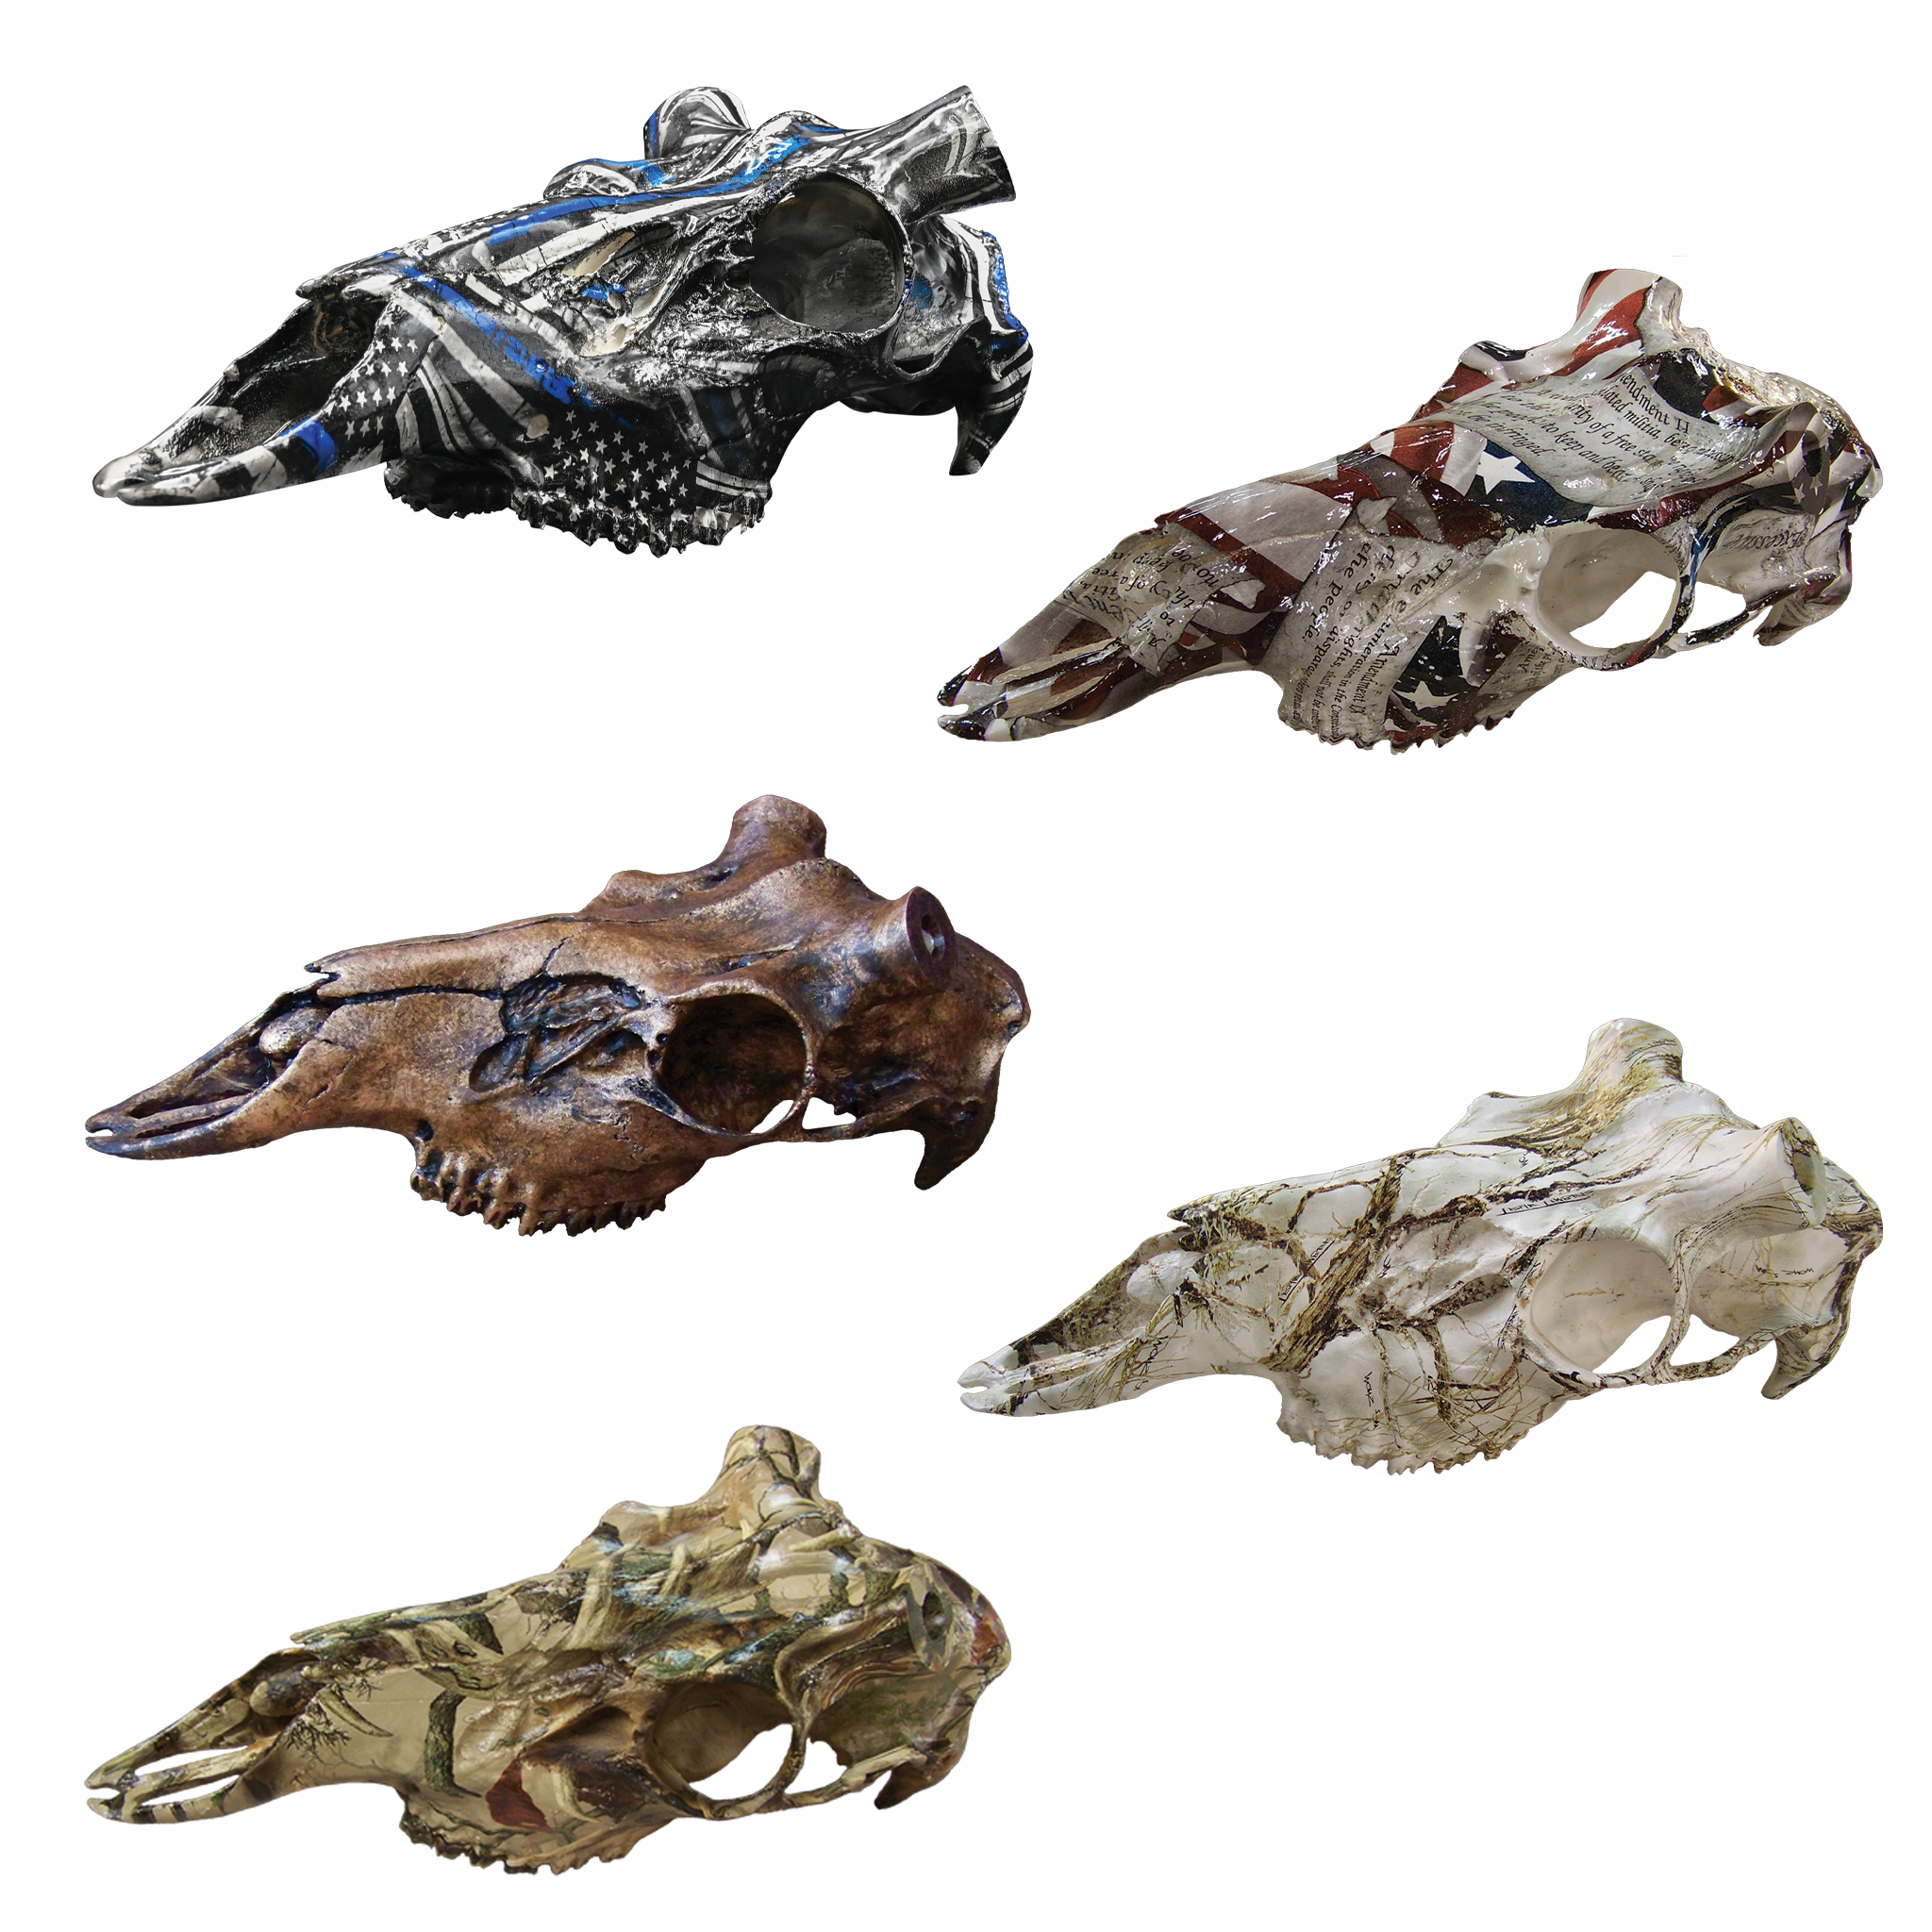 Hydrocoated Reproduction Skulls with Molars by Outlaw Skulls